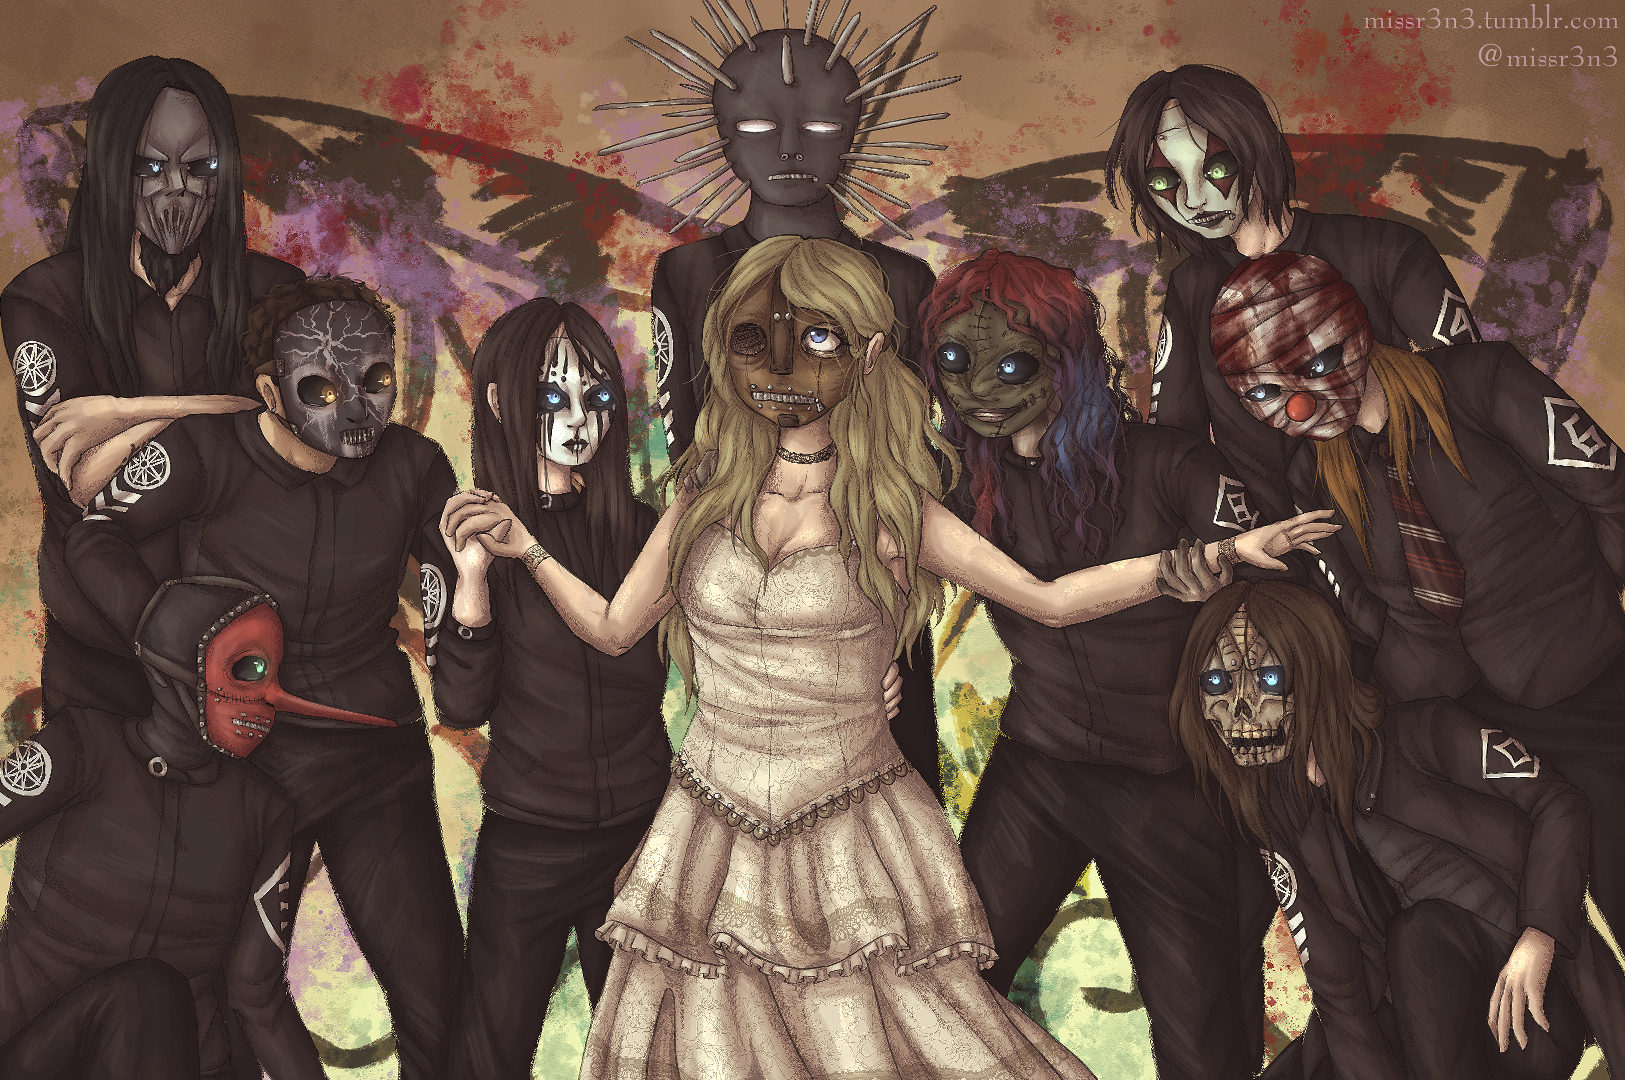 a drawing of the original lineup of slipknot in their volume 3 masks surrounding the girl from the vermillion music video